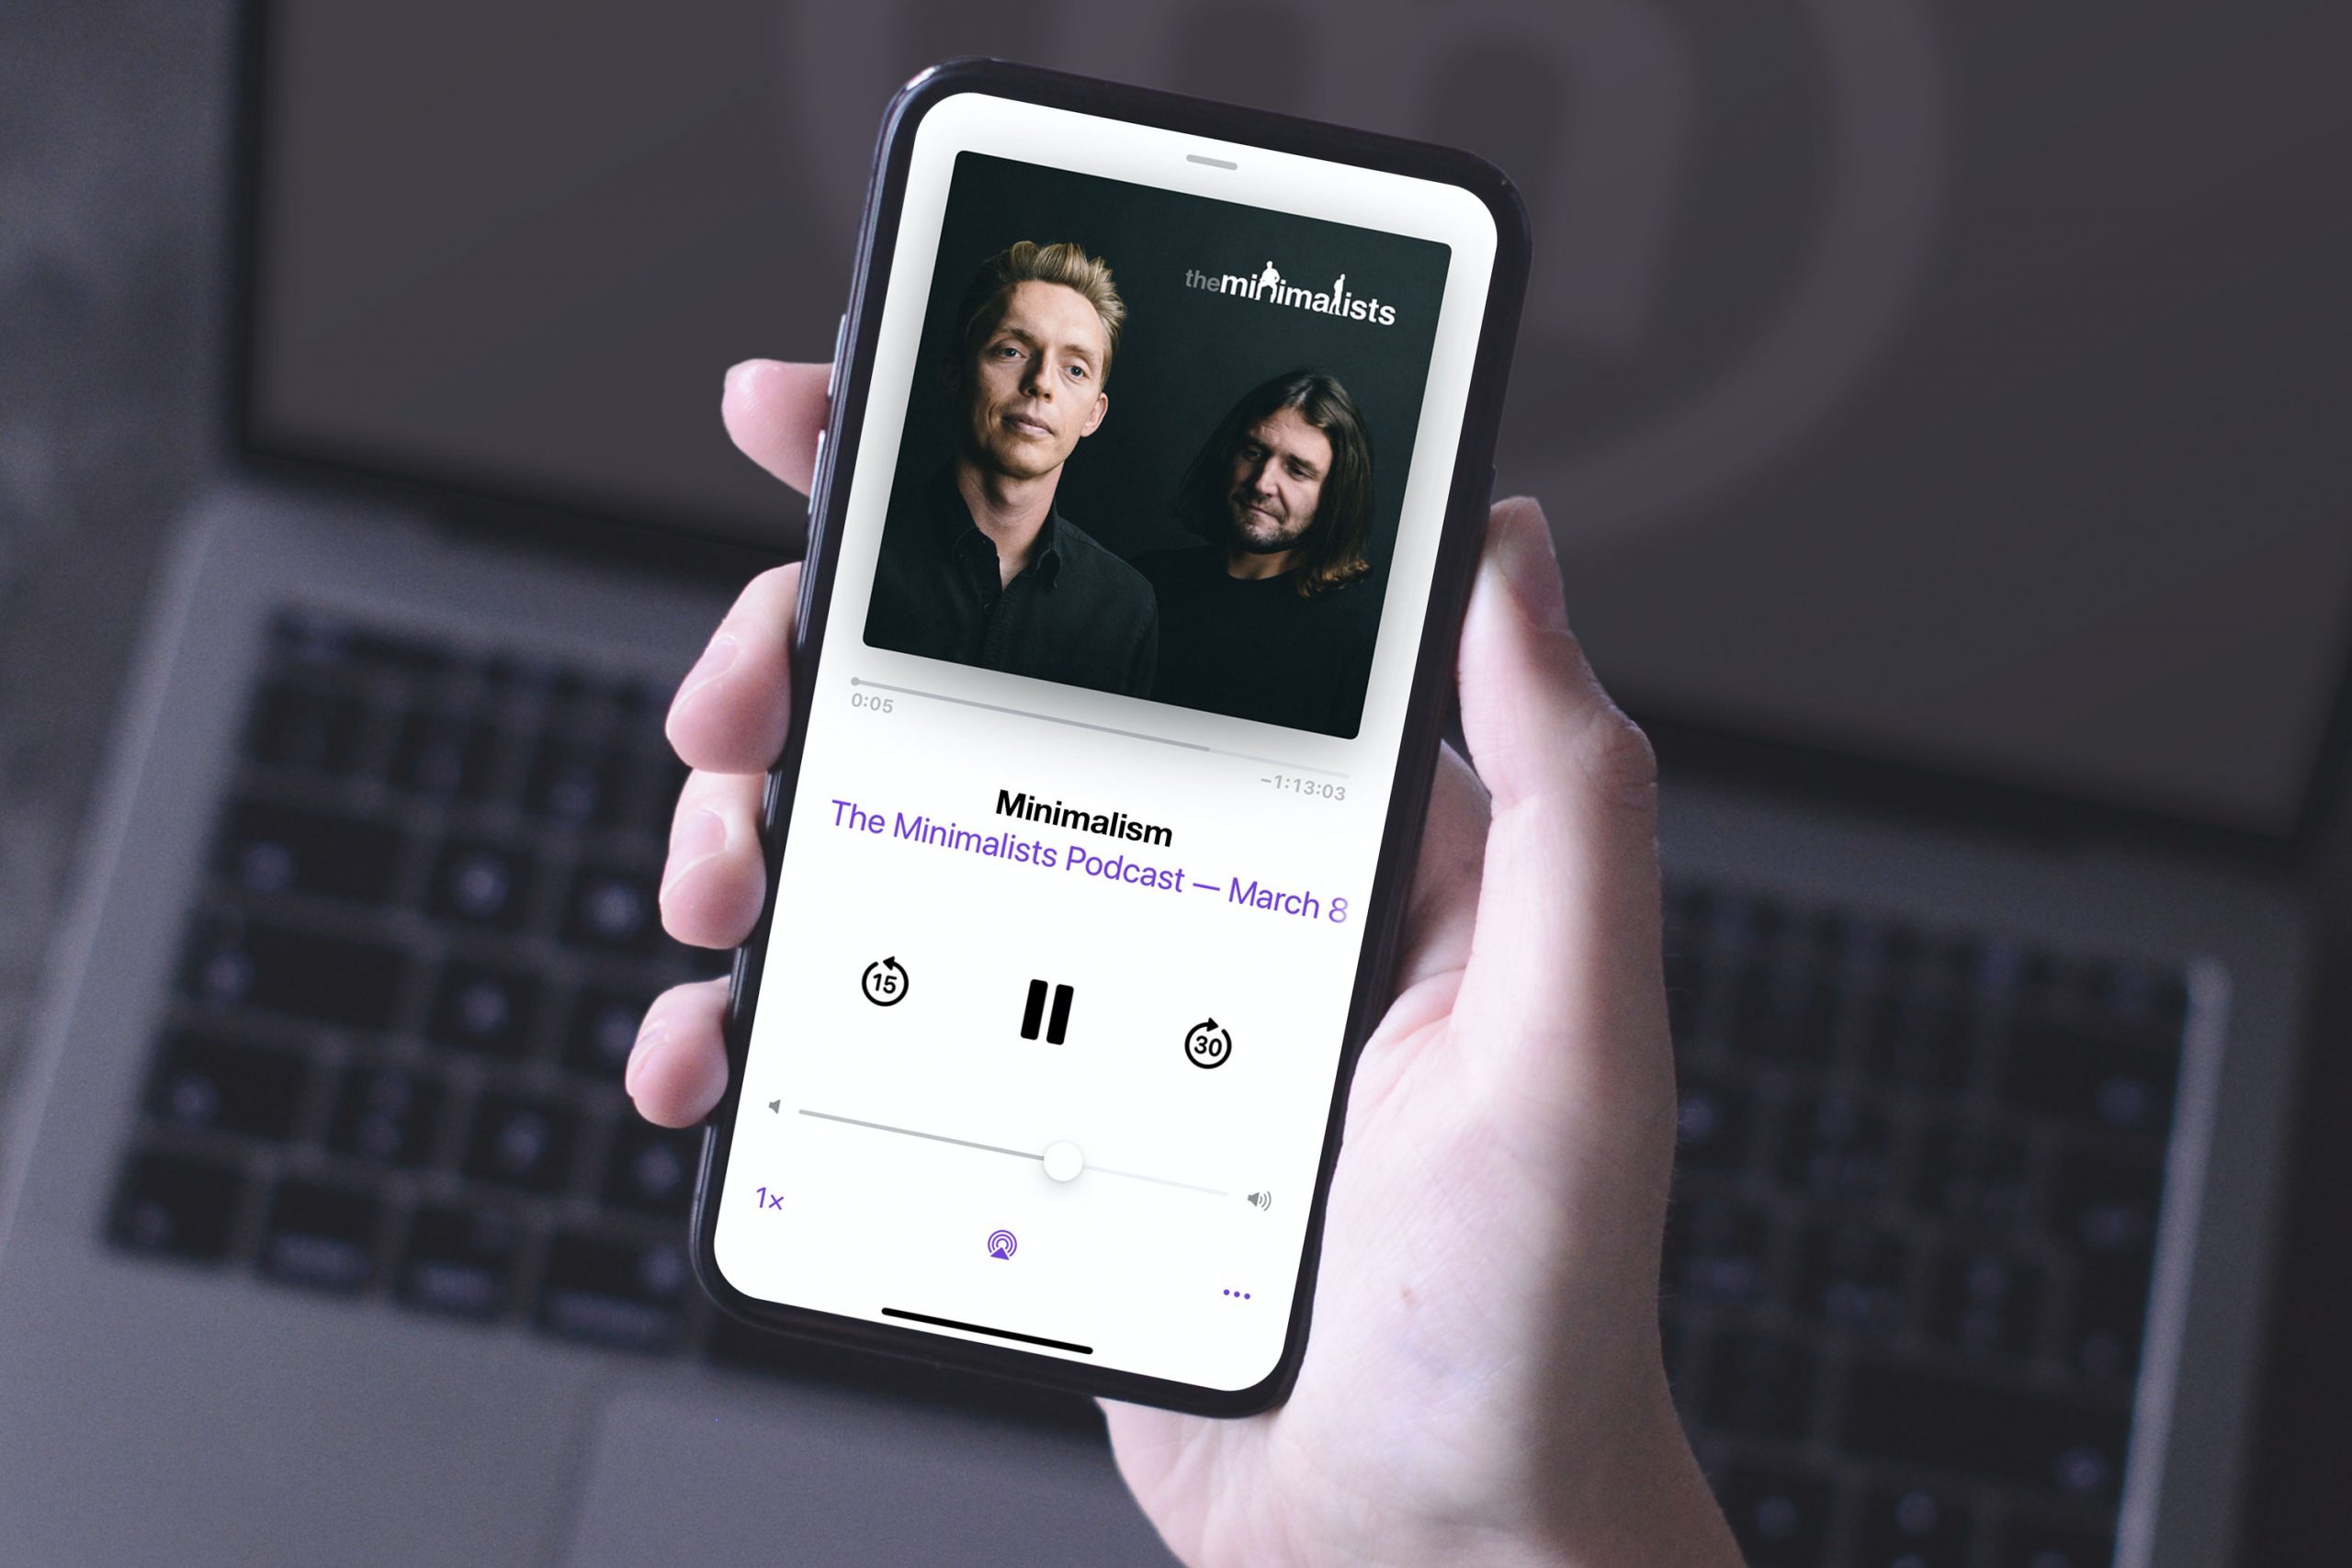 The Minimalists Podcast picture